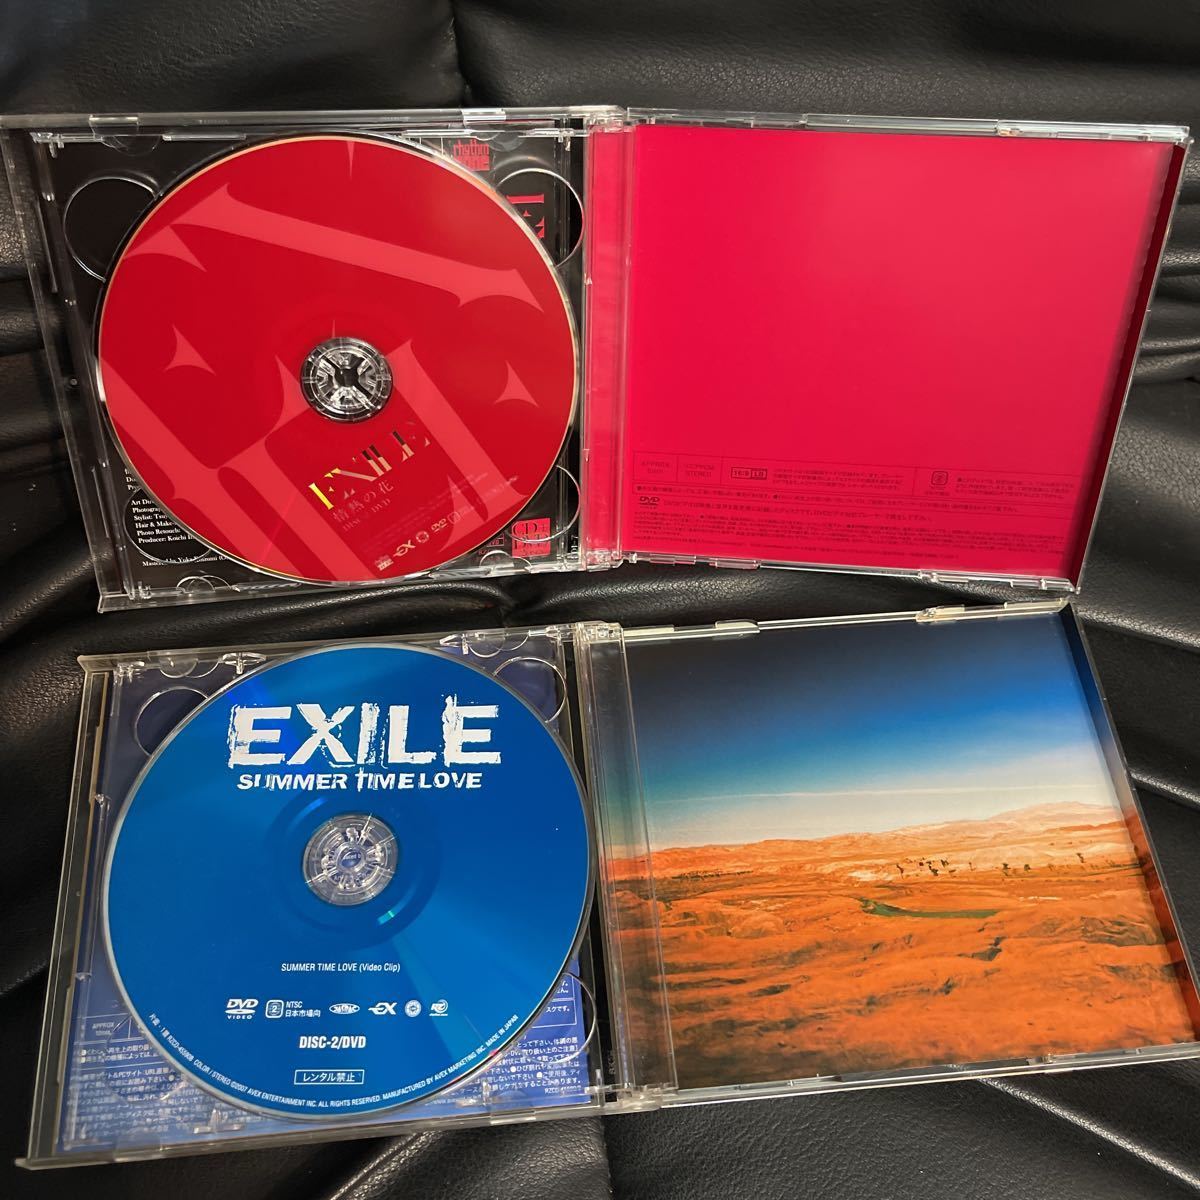 EXILE CD4枚セット　シングルCD2枚+アルバム2枚 「our style」「SELECT BEST」 「SUMMER TIME LOVE」「情熱の花」 中古 ＊8_画像4